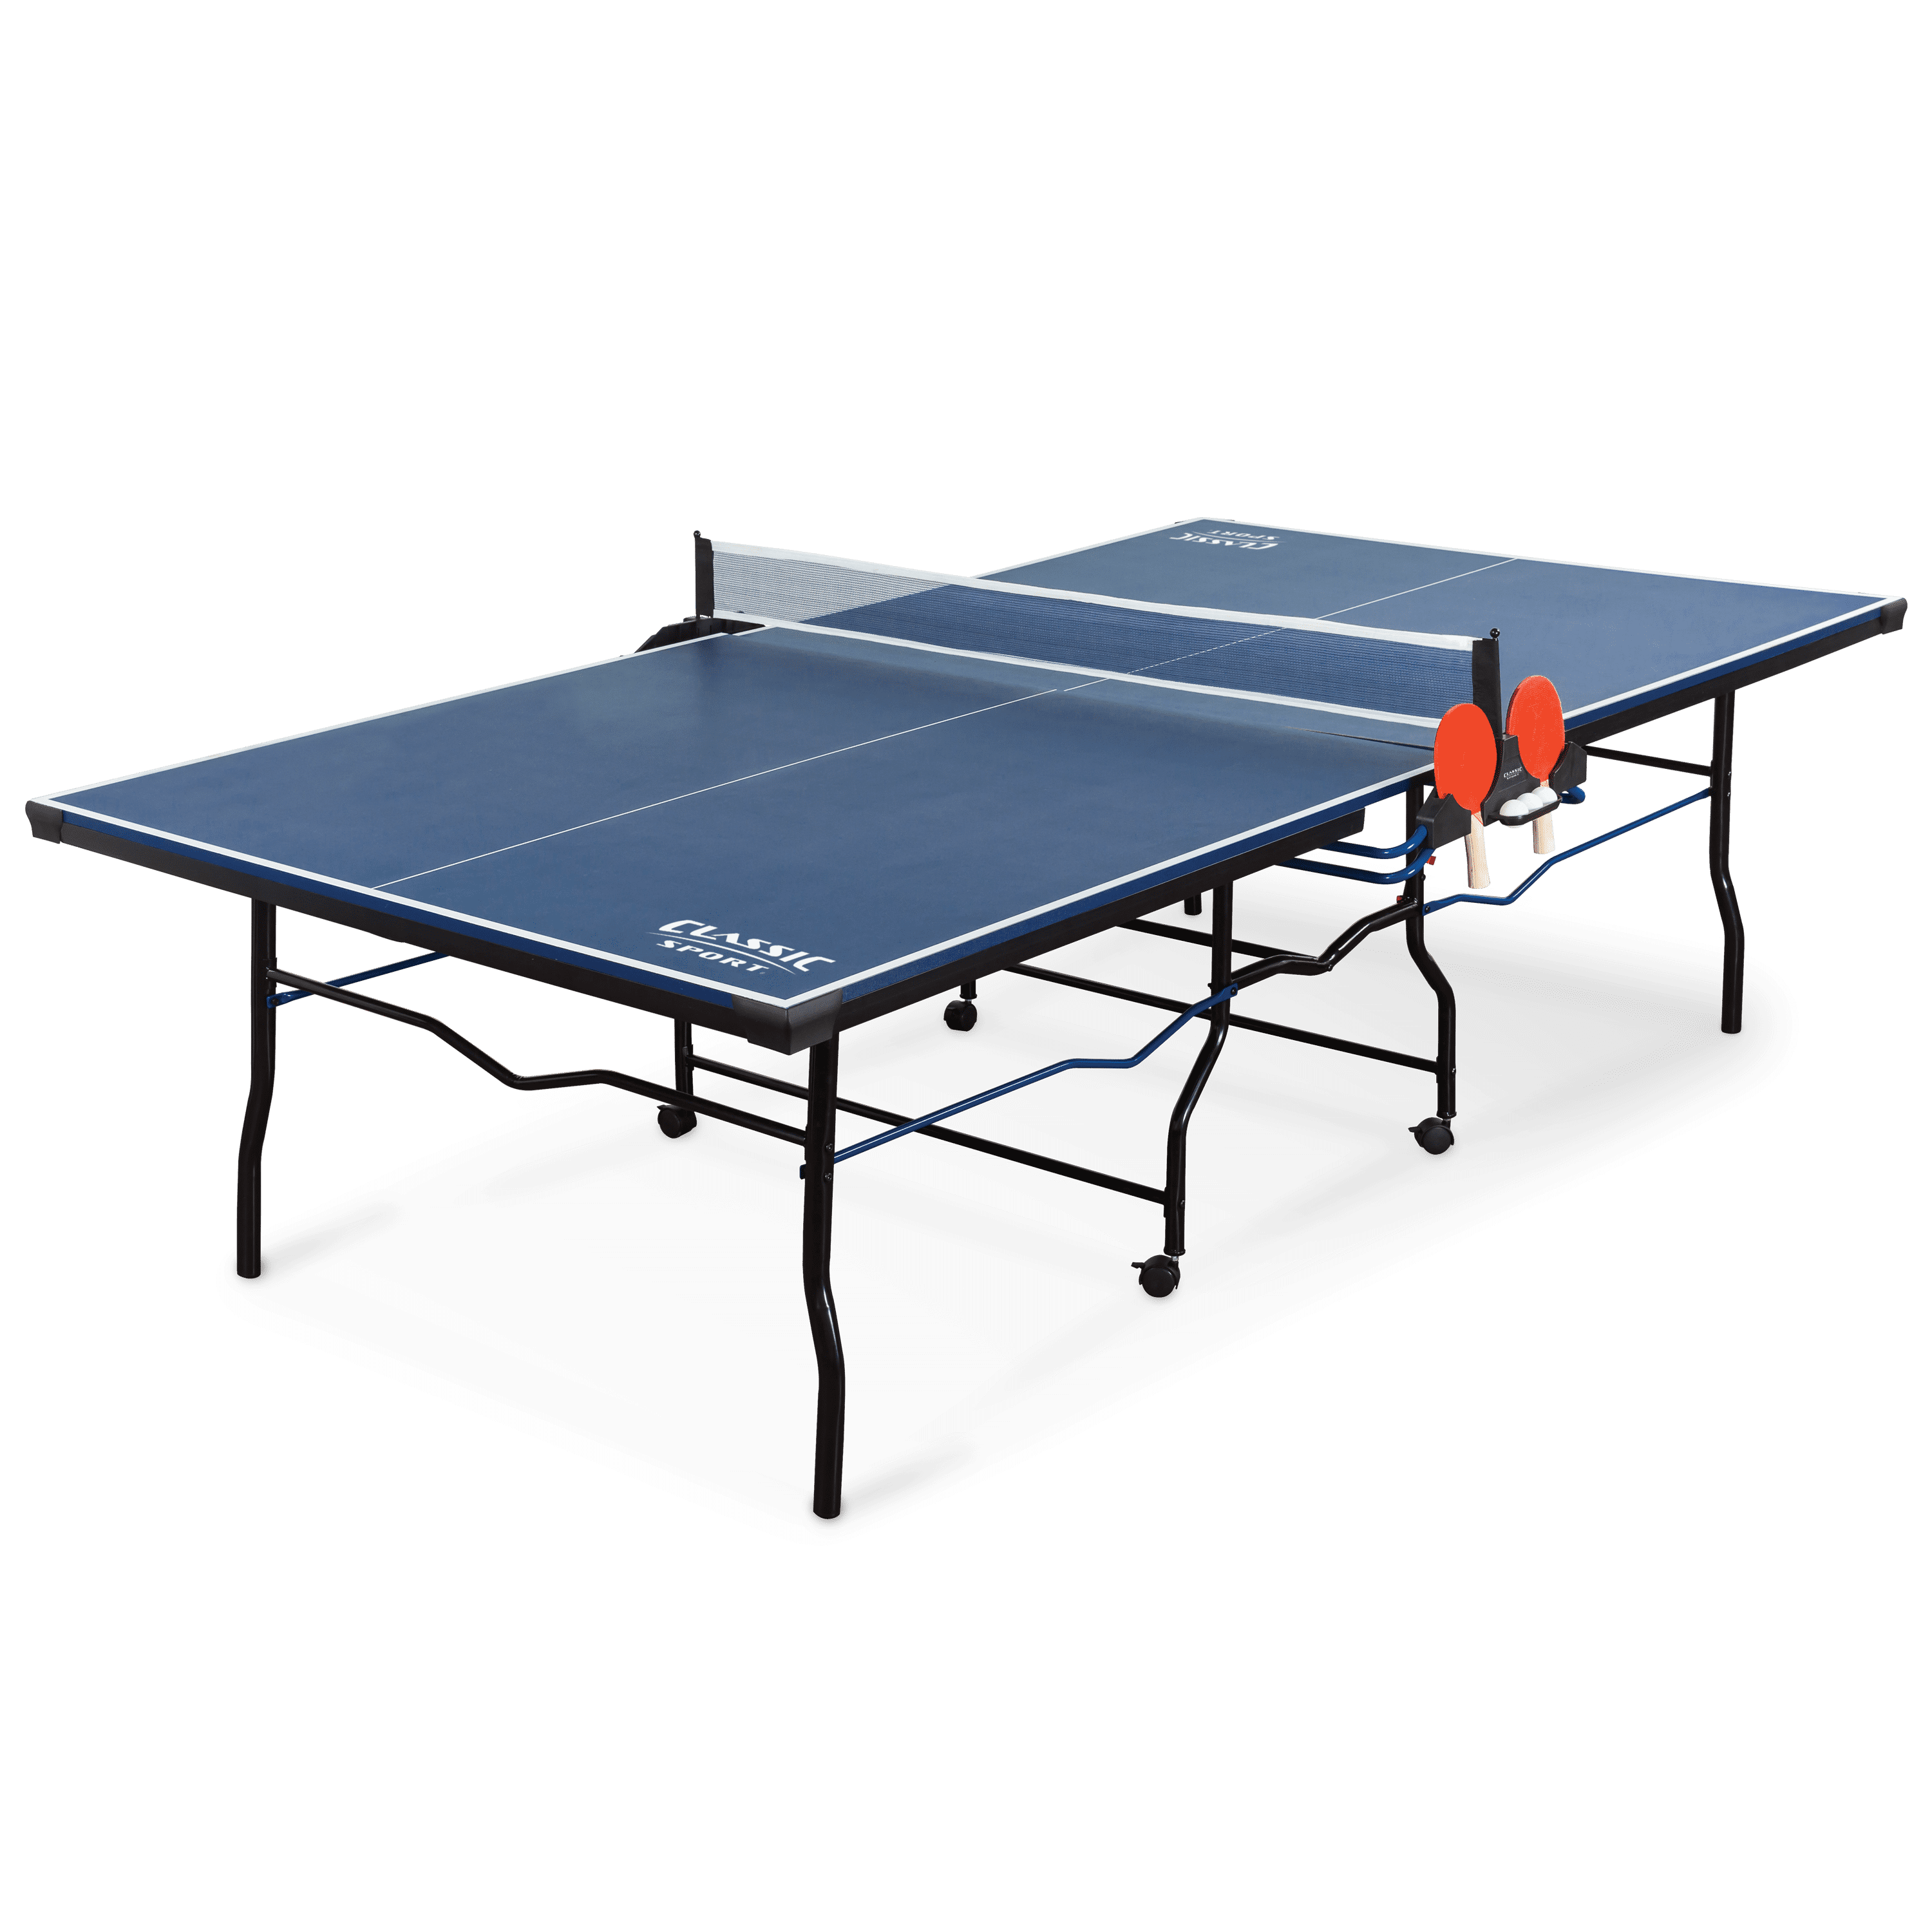 TABLE TENNIS TOURNAMENT free online game on